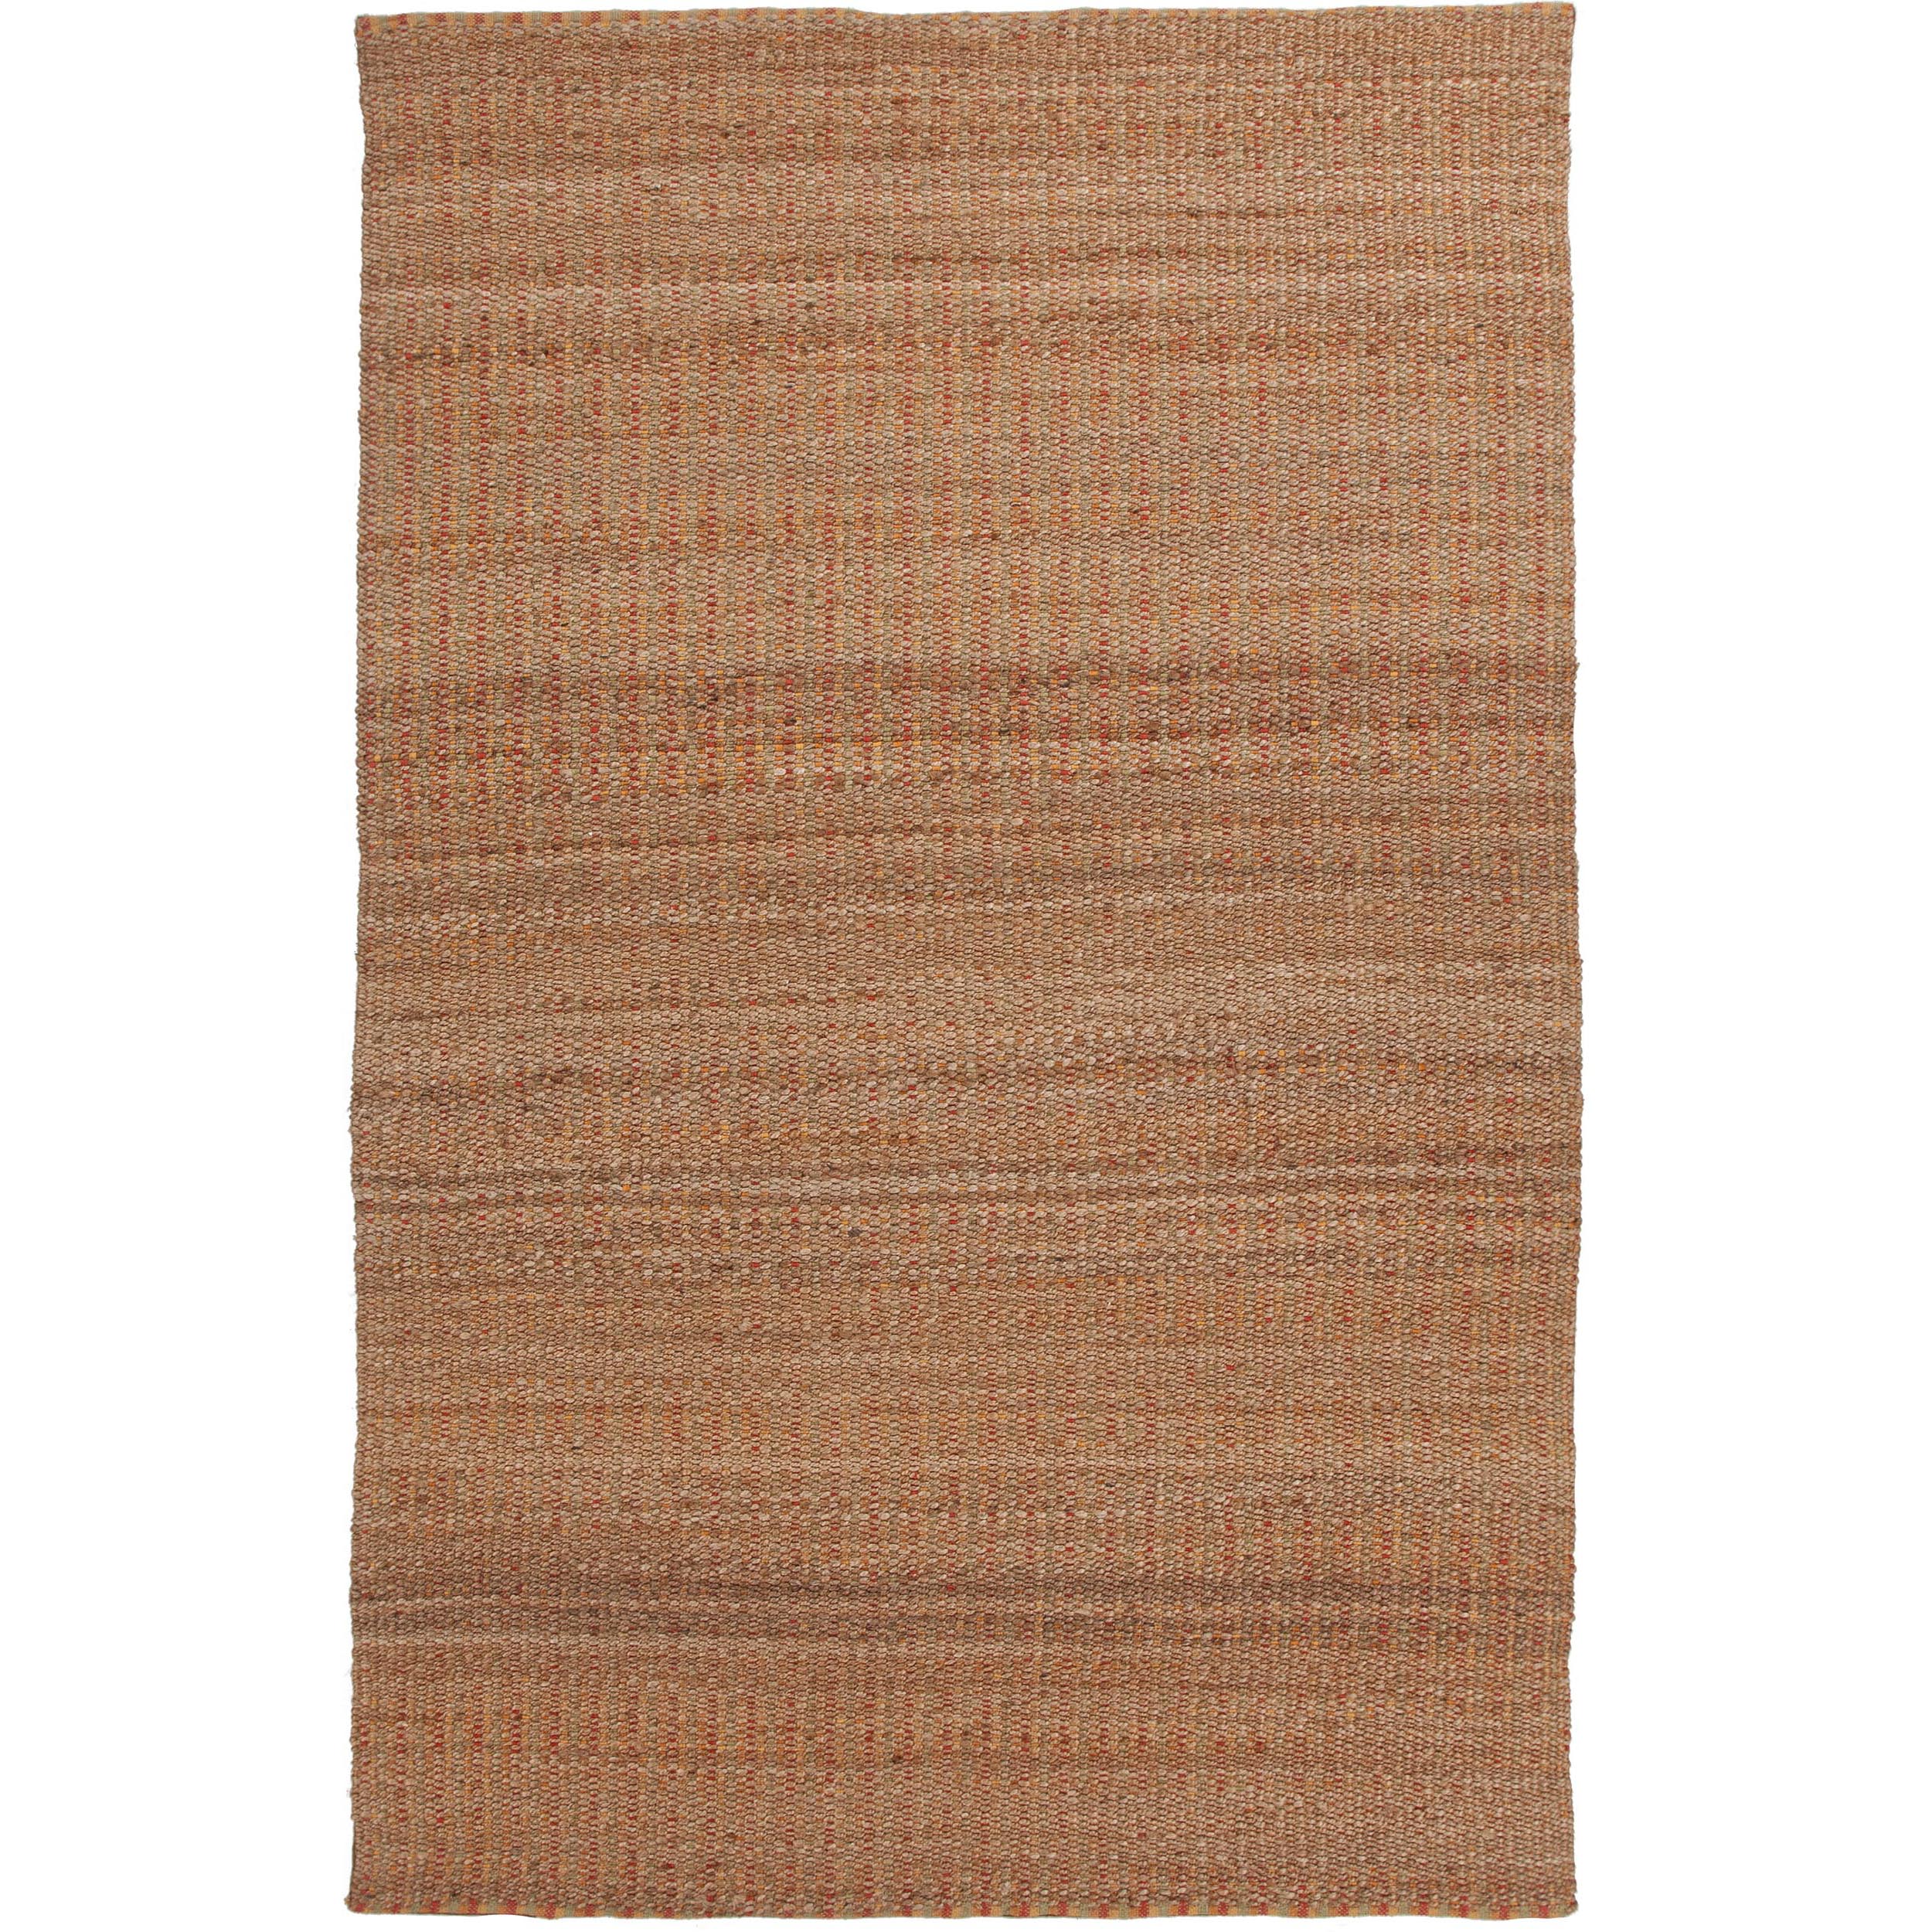 Natural Solid Jute/ Cotton Red/ Orange Rug (26 x 4) Today $34.99